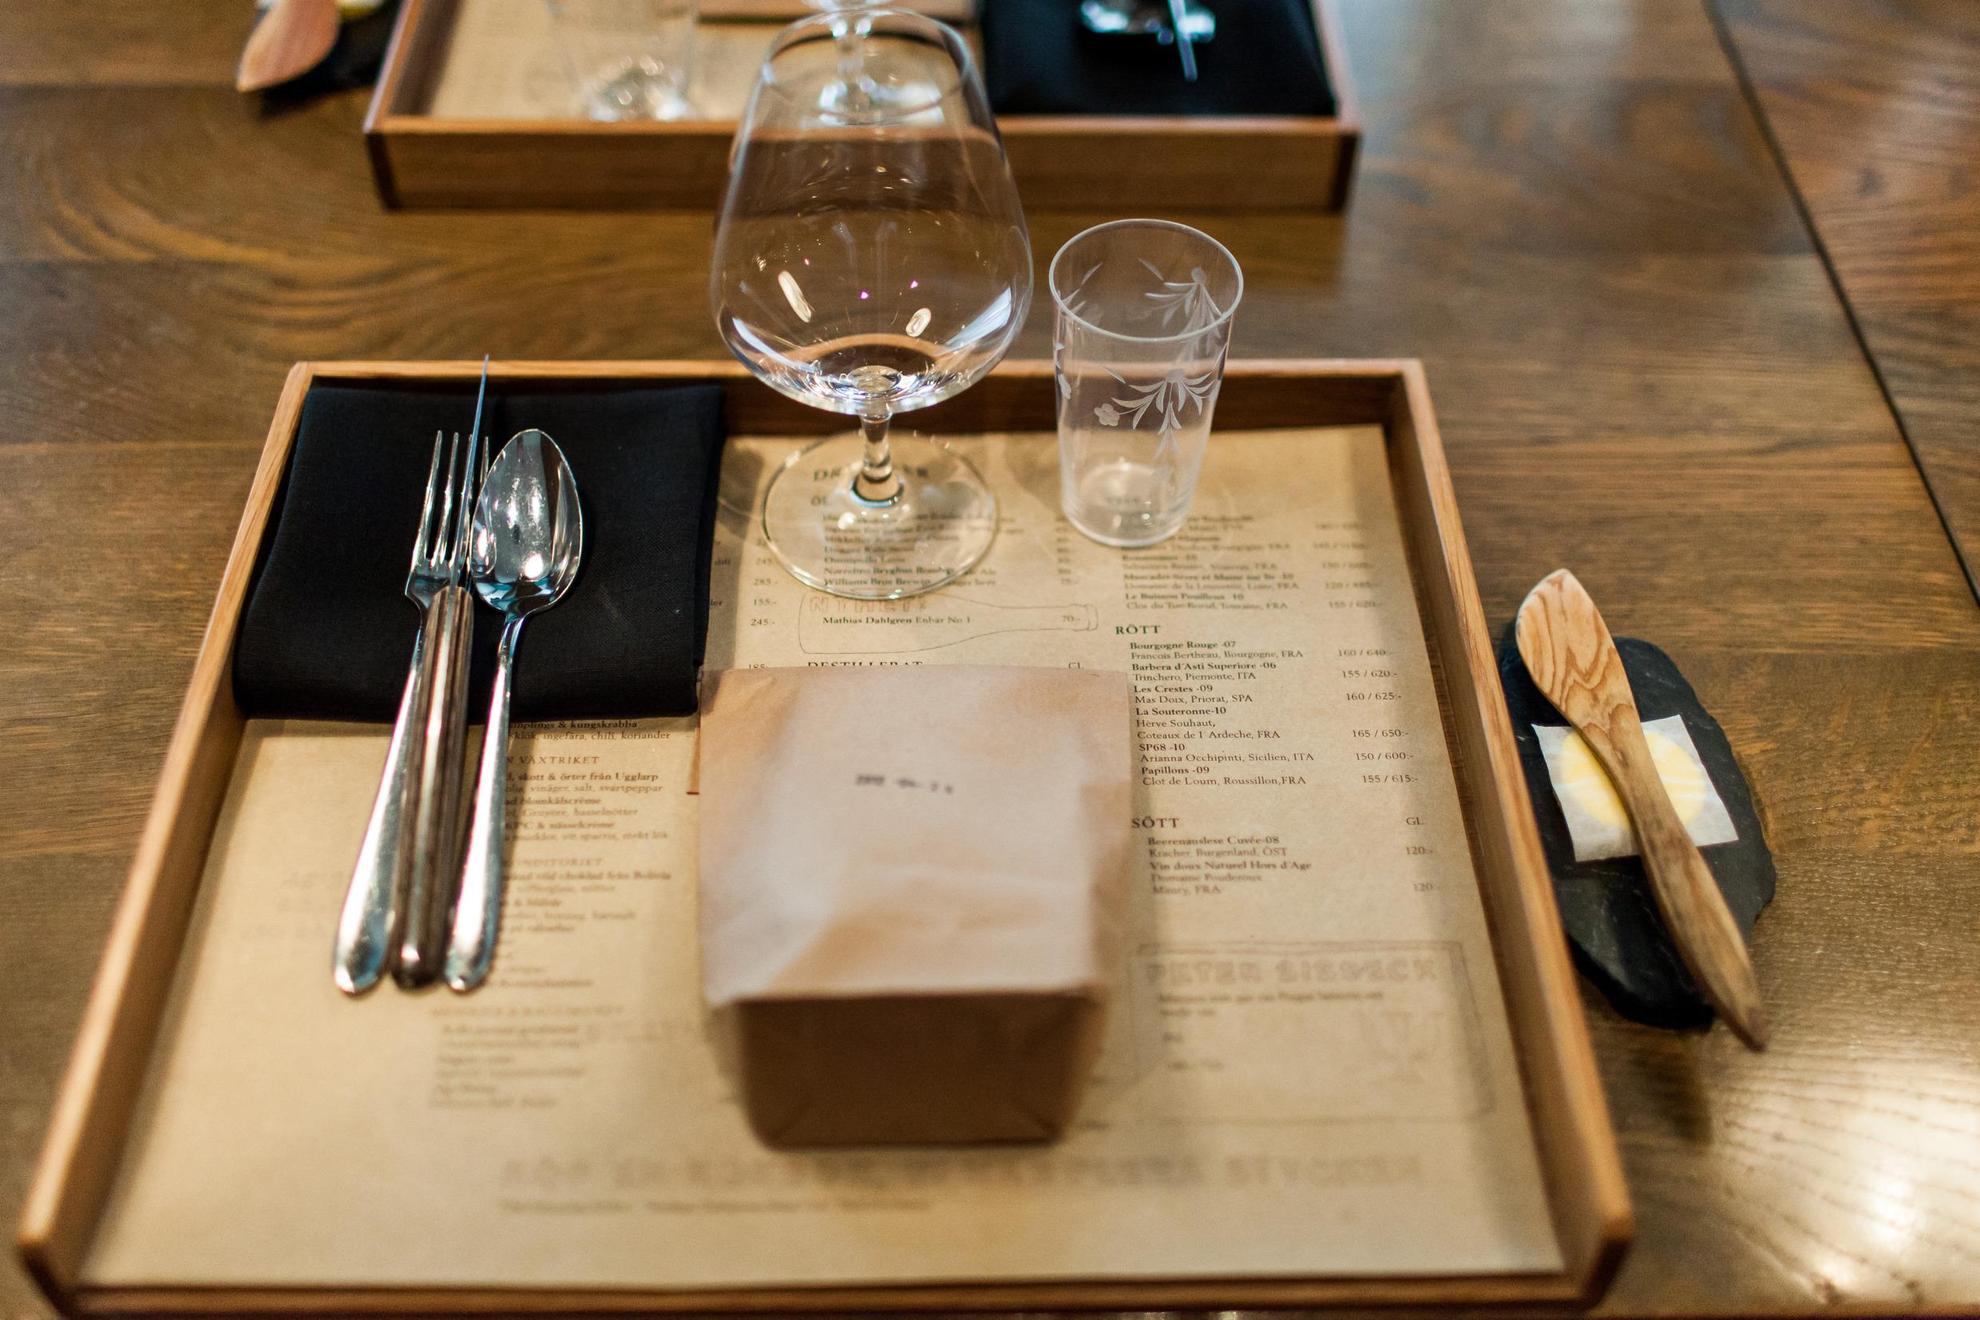 A neat table setting with cutlery, menus and plates at a culinary restaurant in Stockholm.